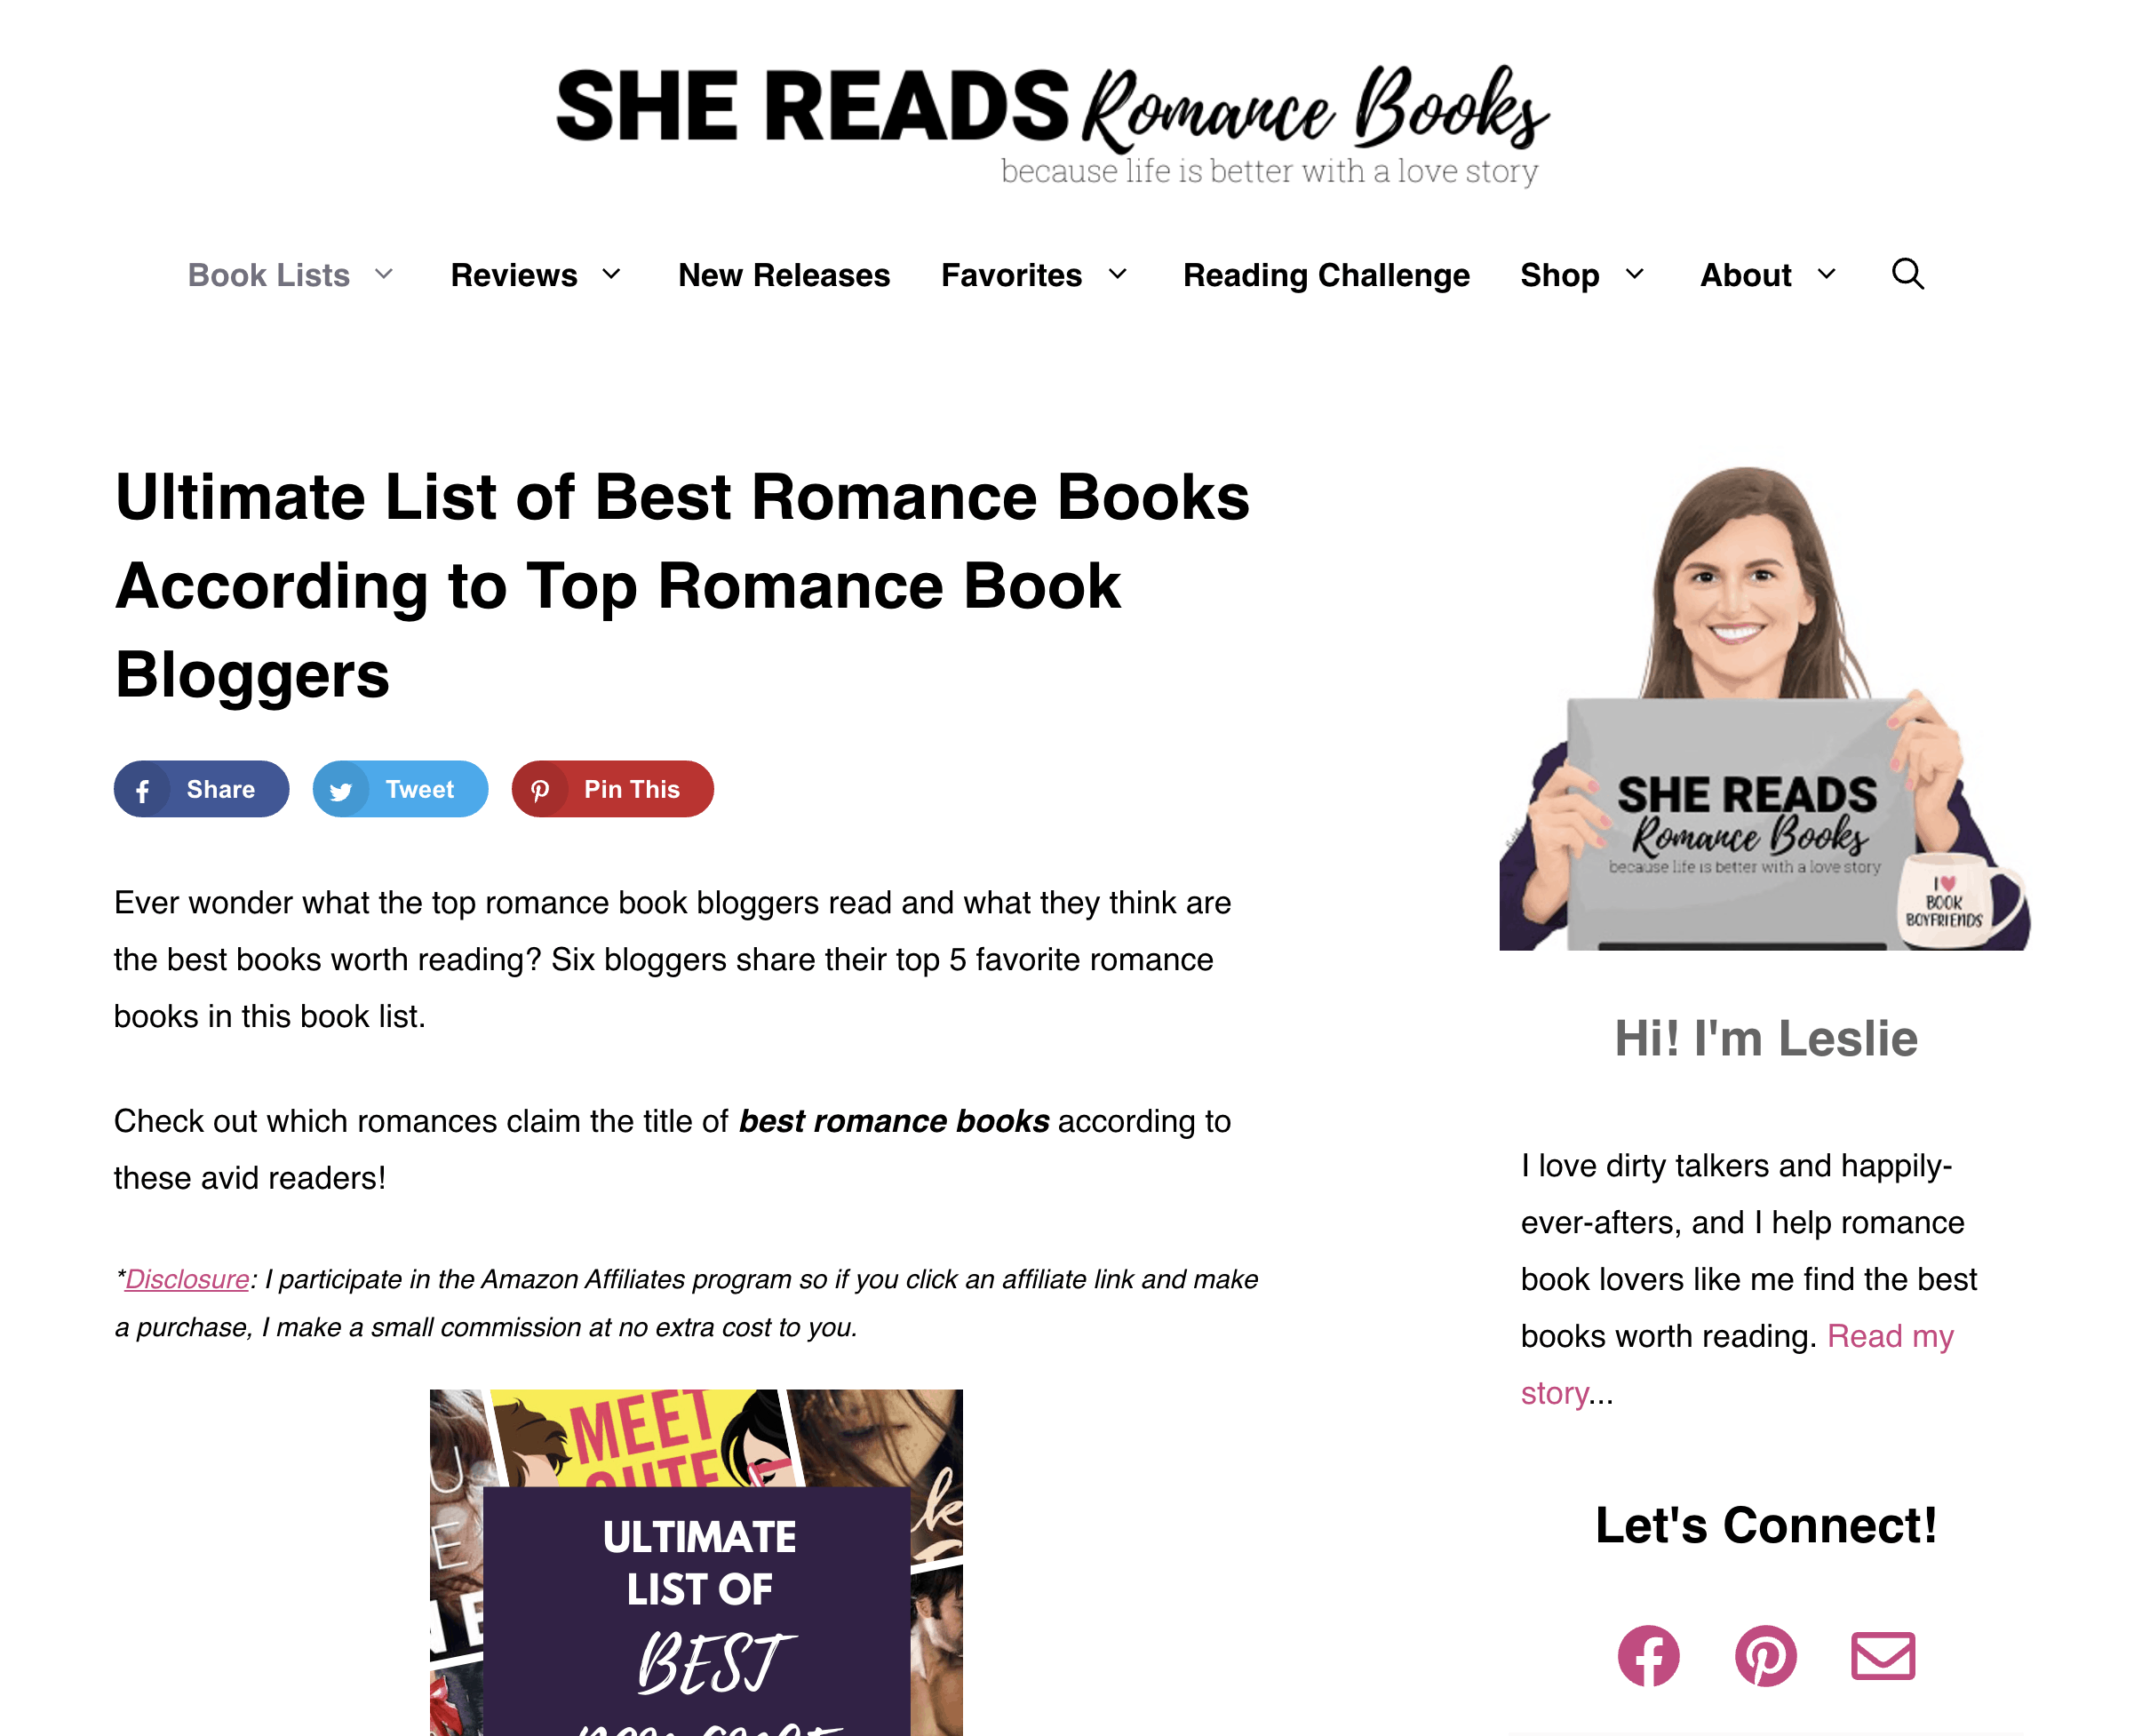 She reads romance books is a book blog that does really well. 